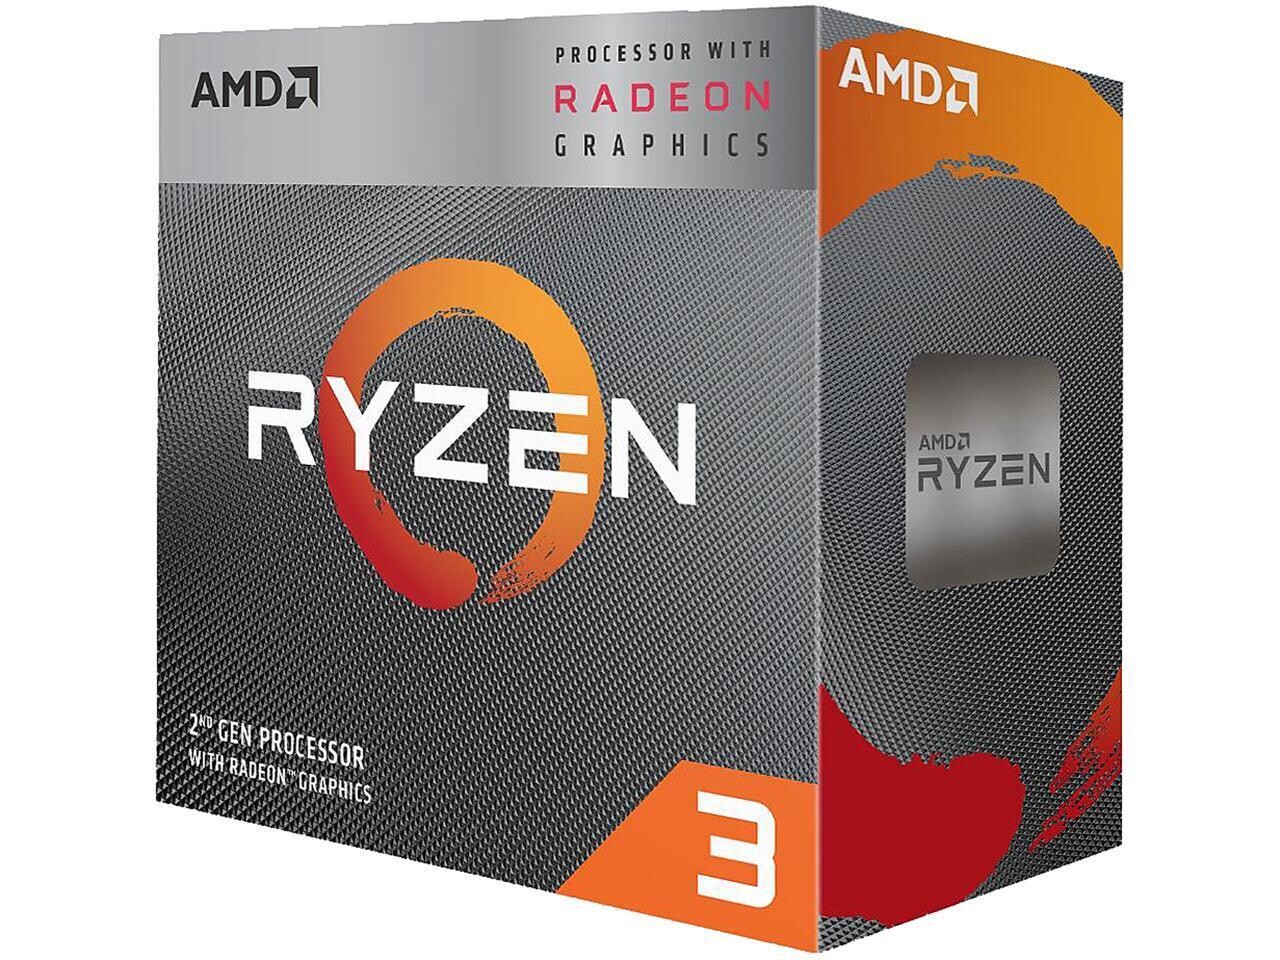 AMD CPU Desktop Ryzen 3 4C/4T 3200G (4.0GHz,6MB,65W,AM4) box, RX Vega 8 Graphics, with Wraith Stealth cooler